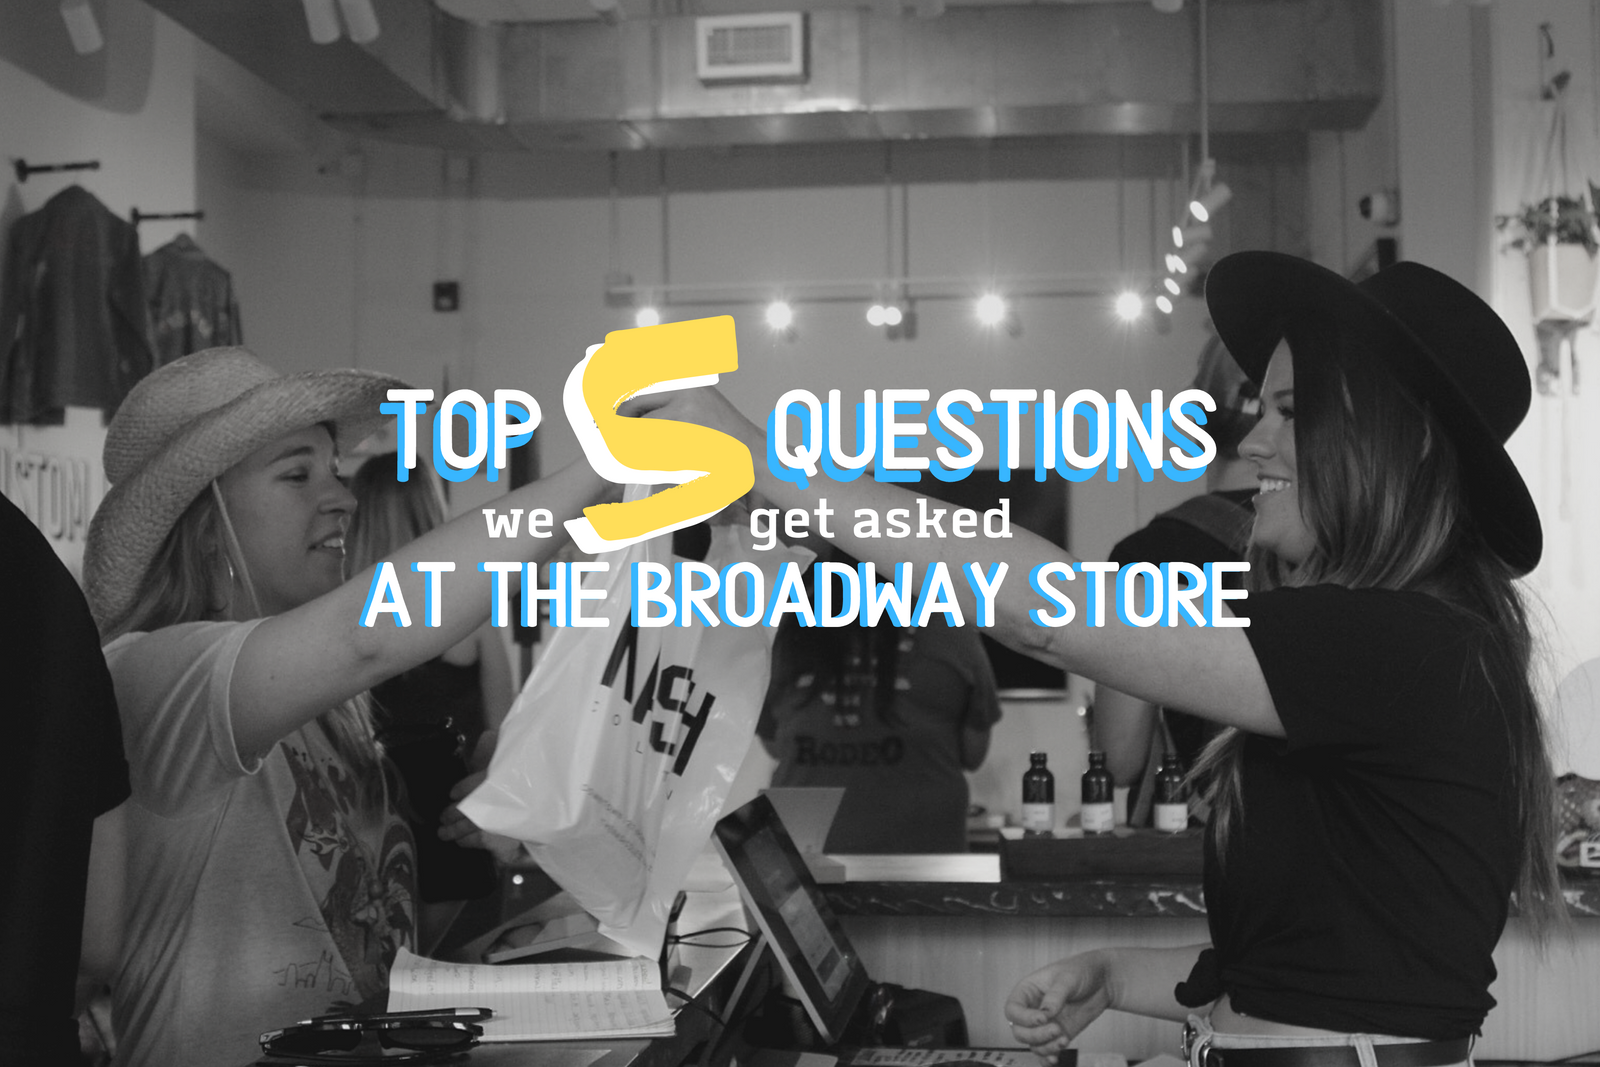 Top 5 Questions From Customers